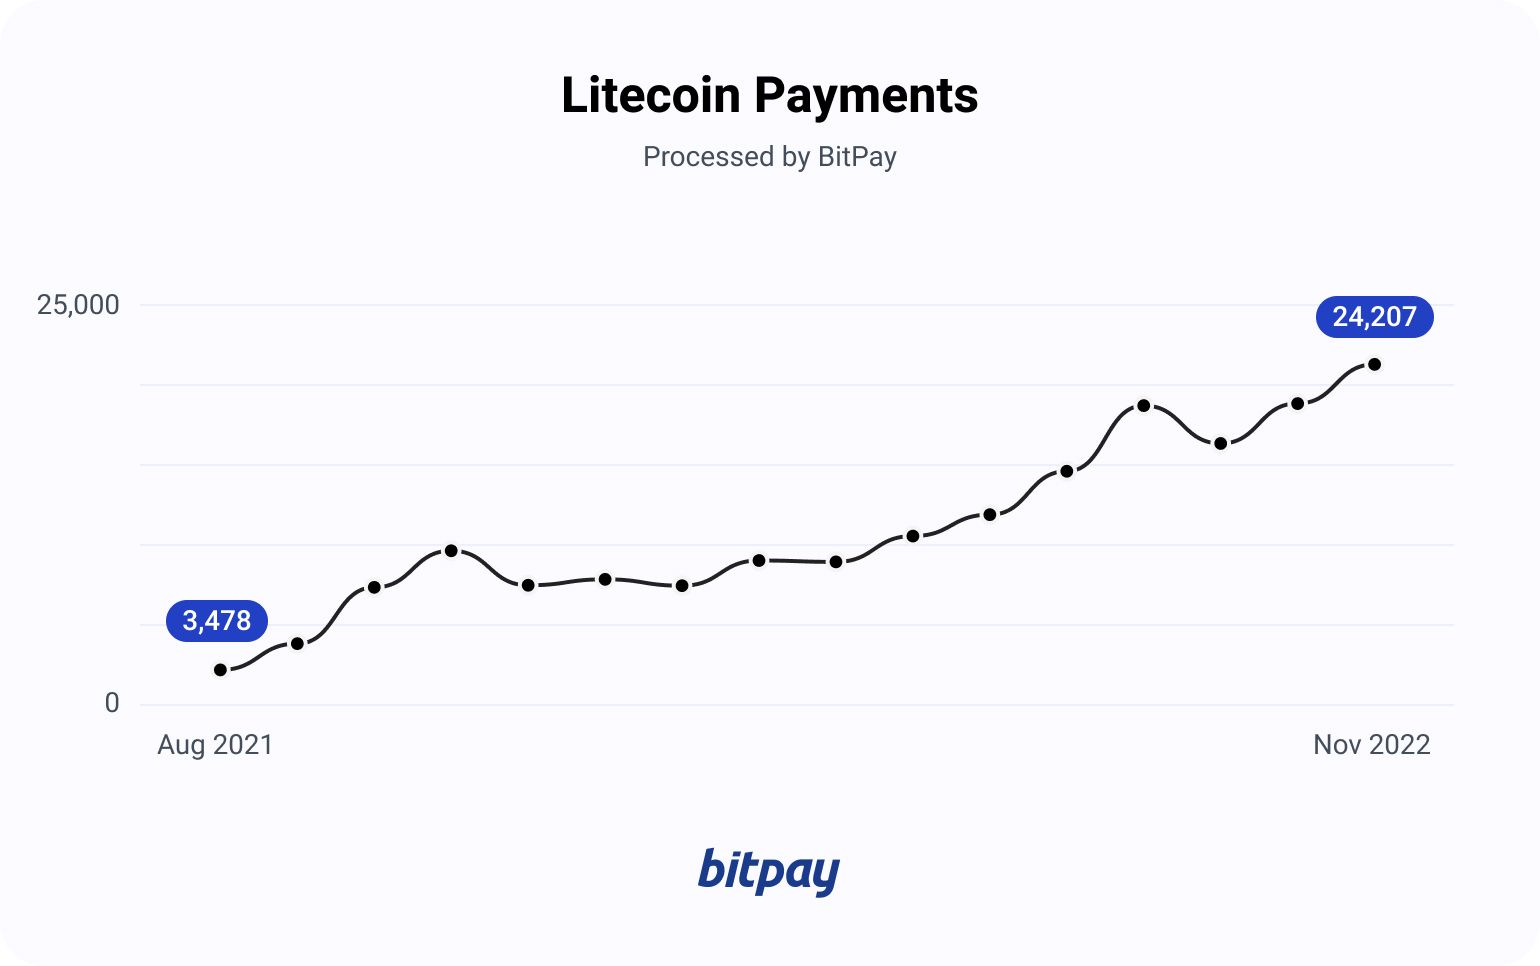 Litecoin on the Rise as Top Crypto Payment Method